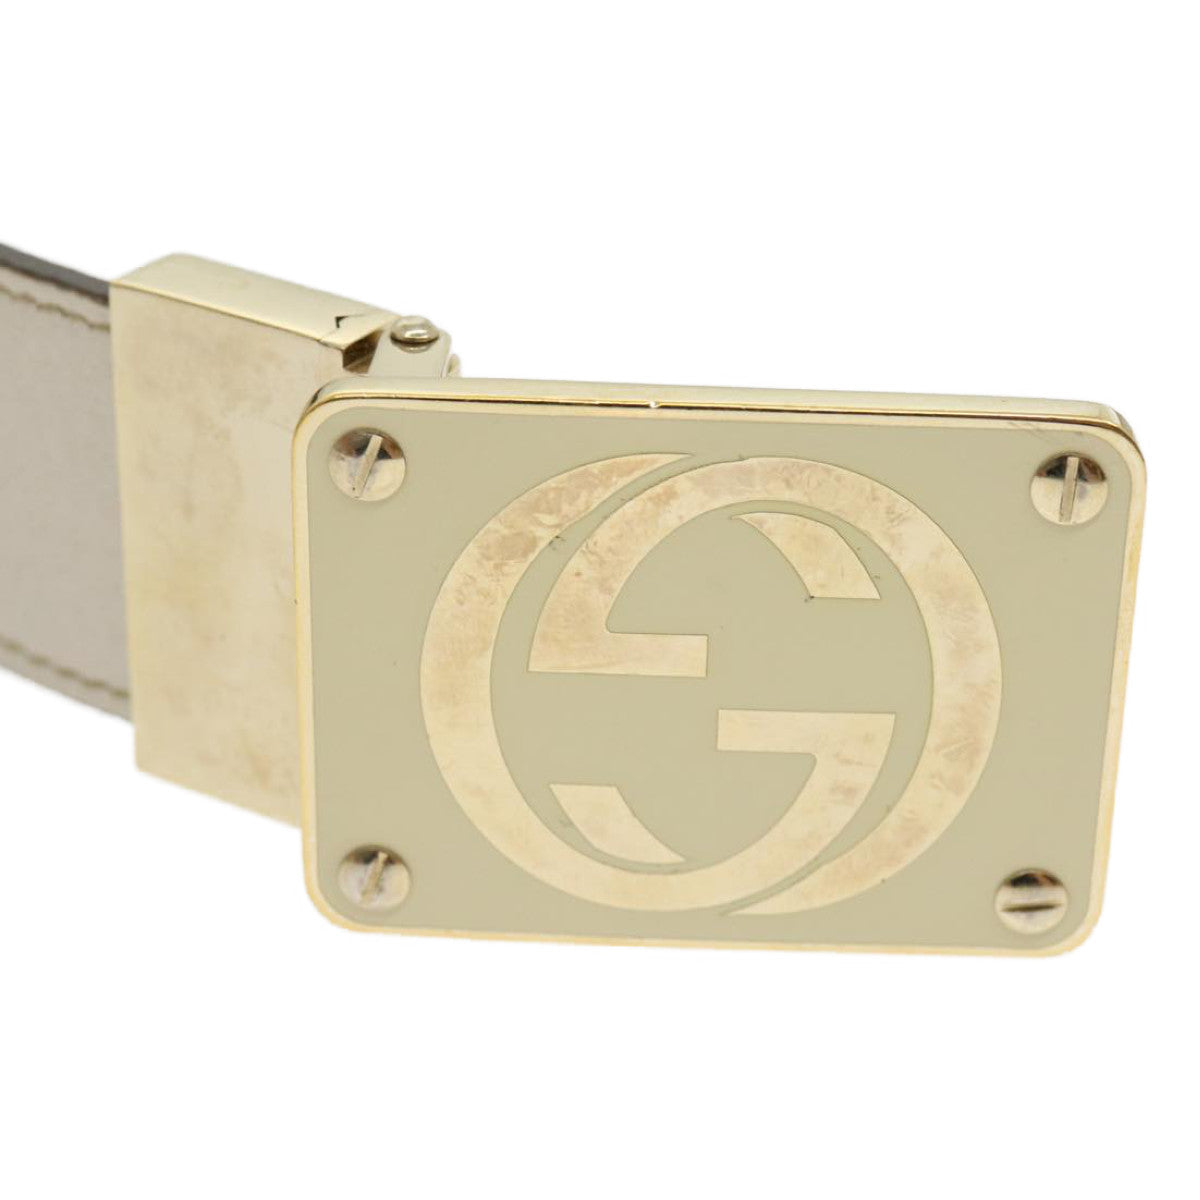 GUCCI GG Canvas Belt Leather Beige White Auth rd2130